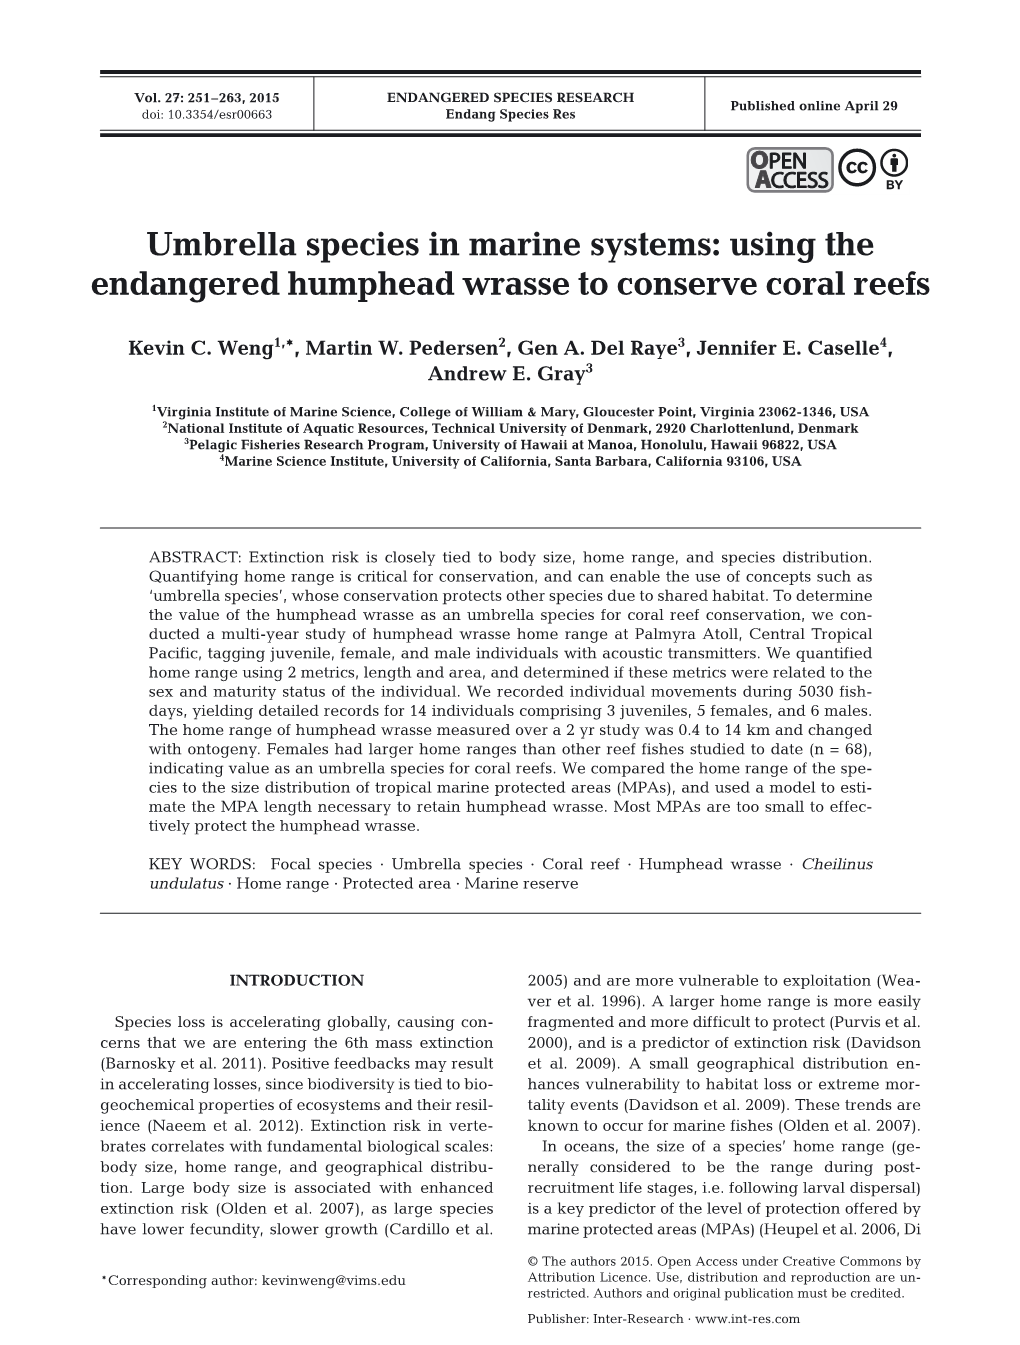 Umbrella Species in Marine Systems: Using the Endangered Humphead Wrasse to Conserve Coral Reefs